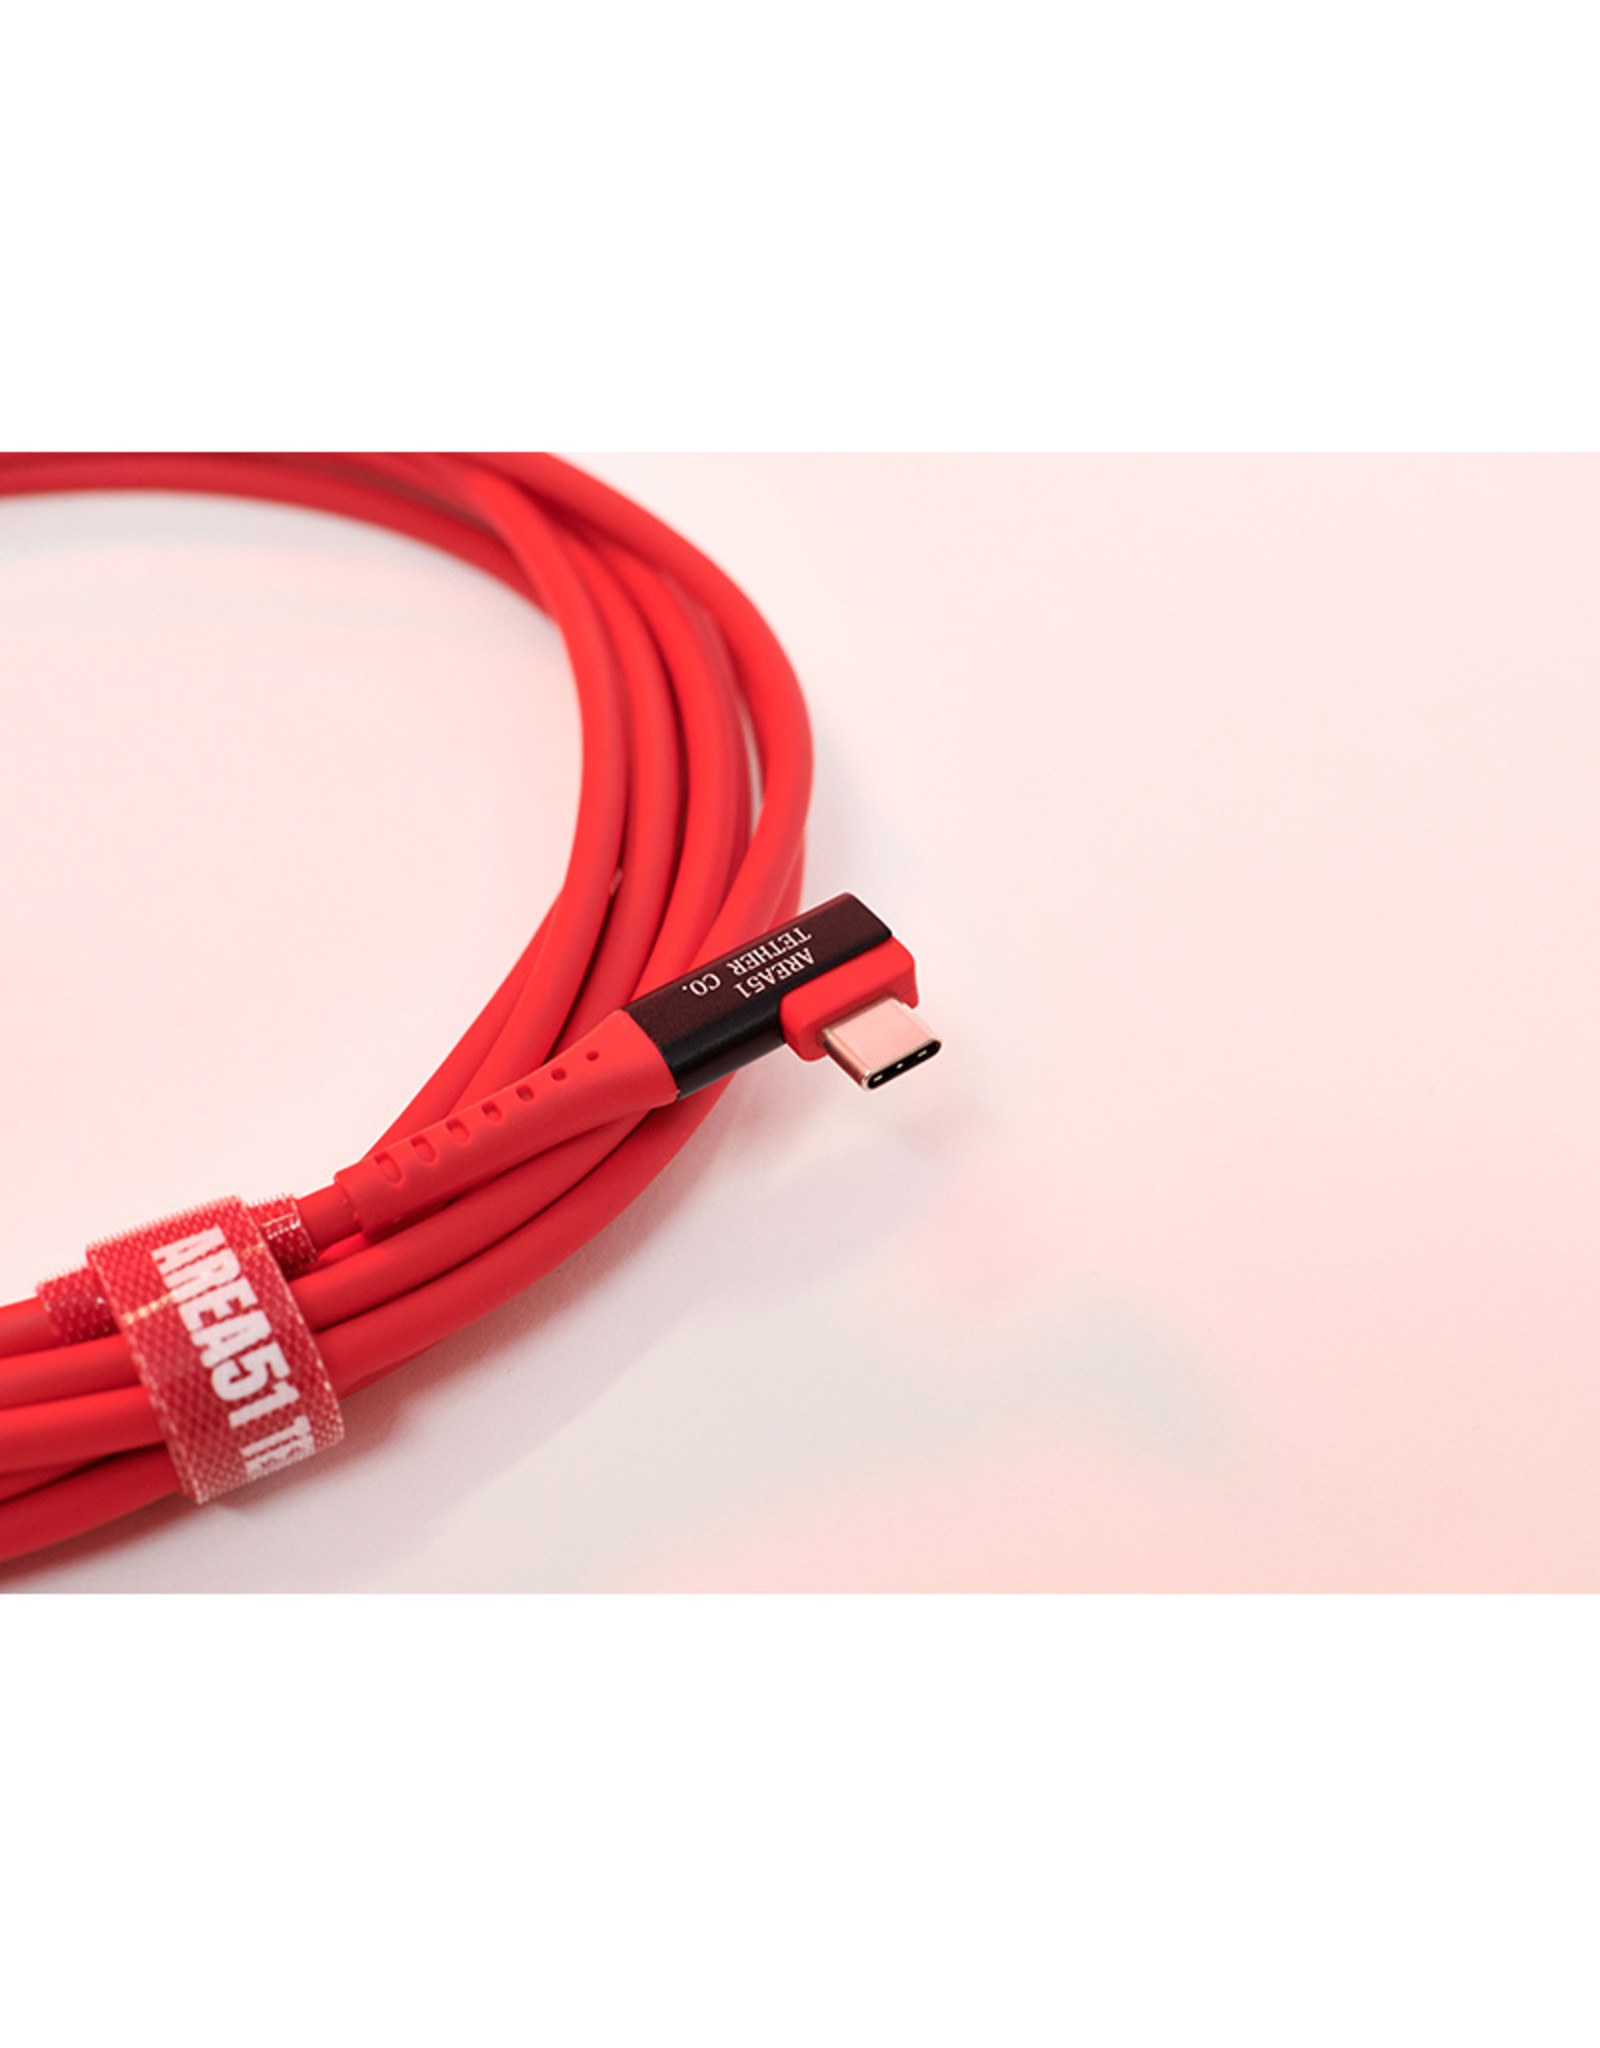 Area51 Area51 Tether Co.  Groom Lake Pro+ USB-C Right Angle to USB-C Tether Cable  4.5m (15')